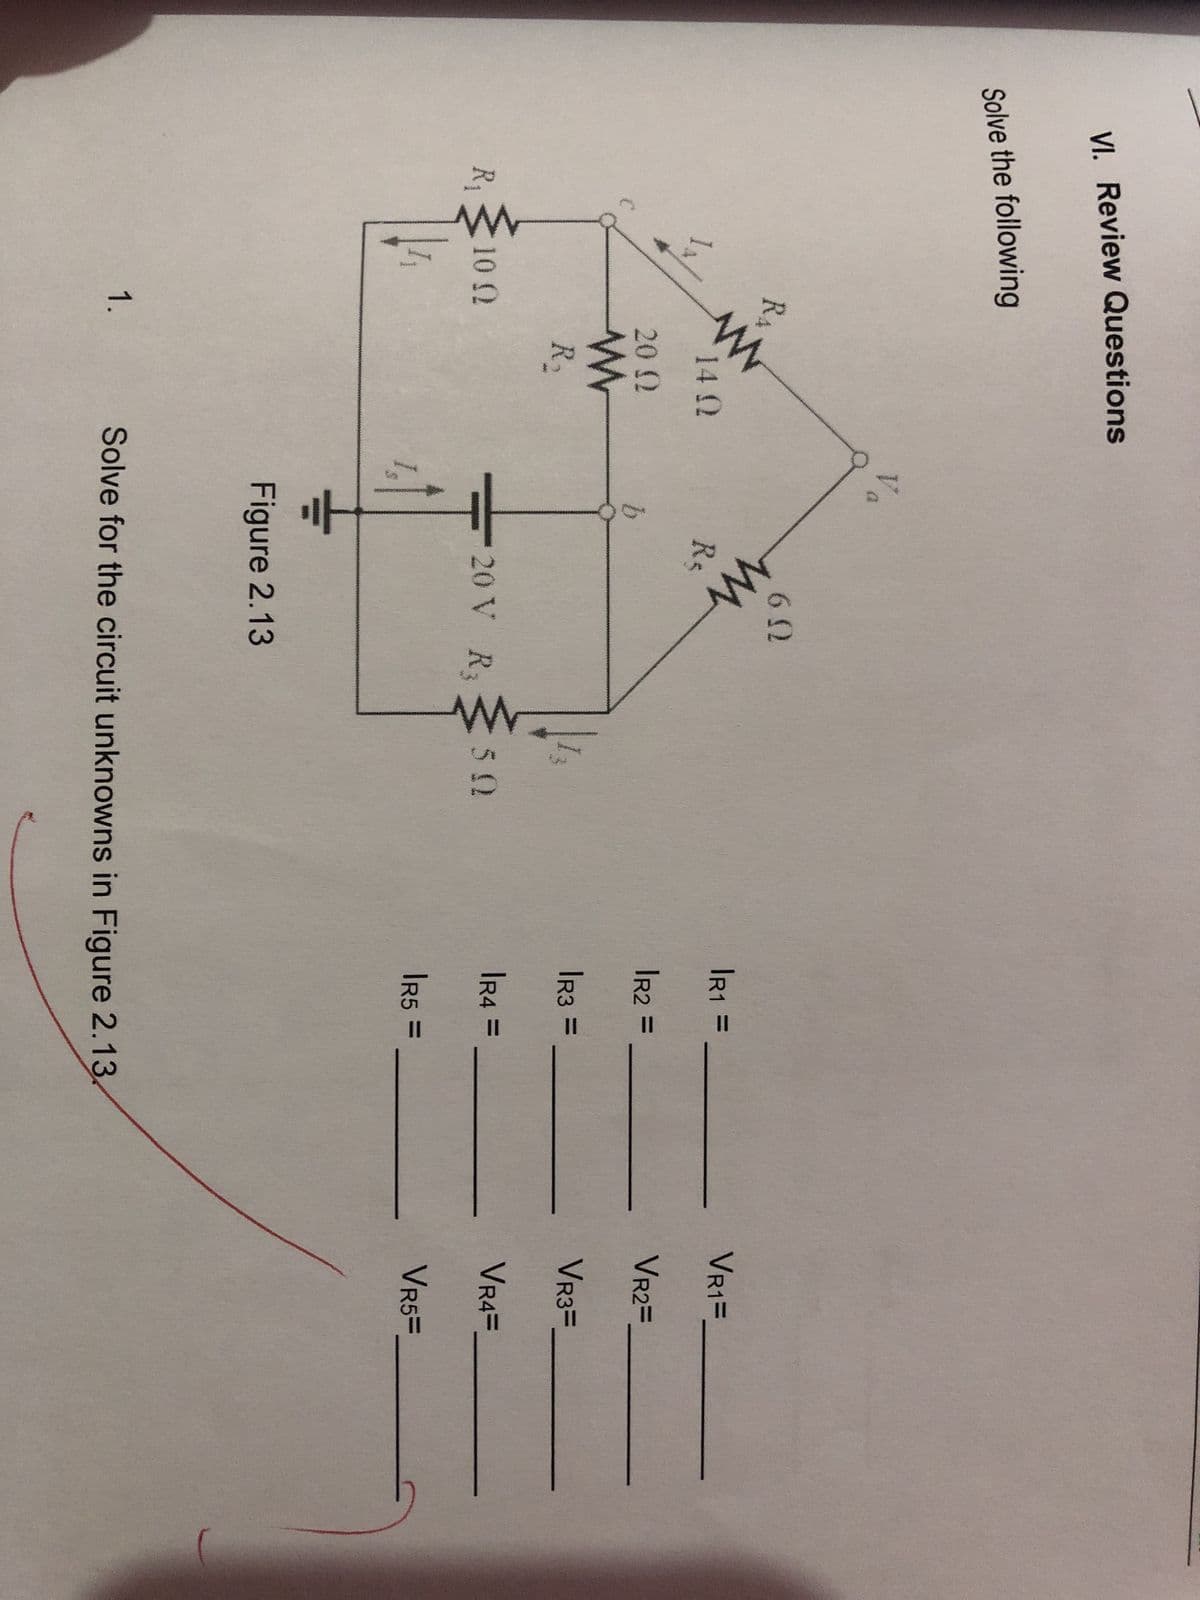 VI. Review Questions
Solve the following
R₁
RA
www
10 (2
1.
14 Q2
20 Ω
www
R₂
Vo
b
6.0
www
Re
20 V R3
Figure 2.13
50
|R1 =
|R2 =
|R3 =
|R4 =
IR5 =
Solve for the circuit unknowns in Figure 2.13.
VR1=
VR2=
VR3=
VR4=
VR5=